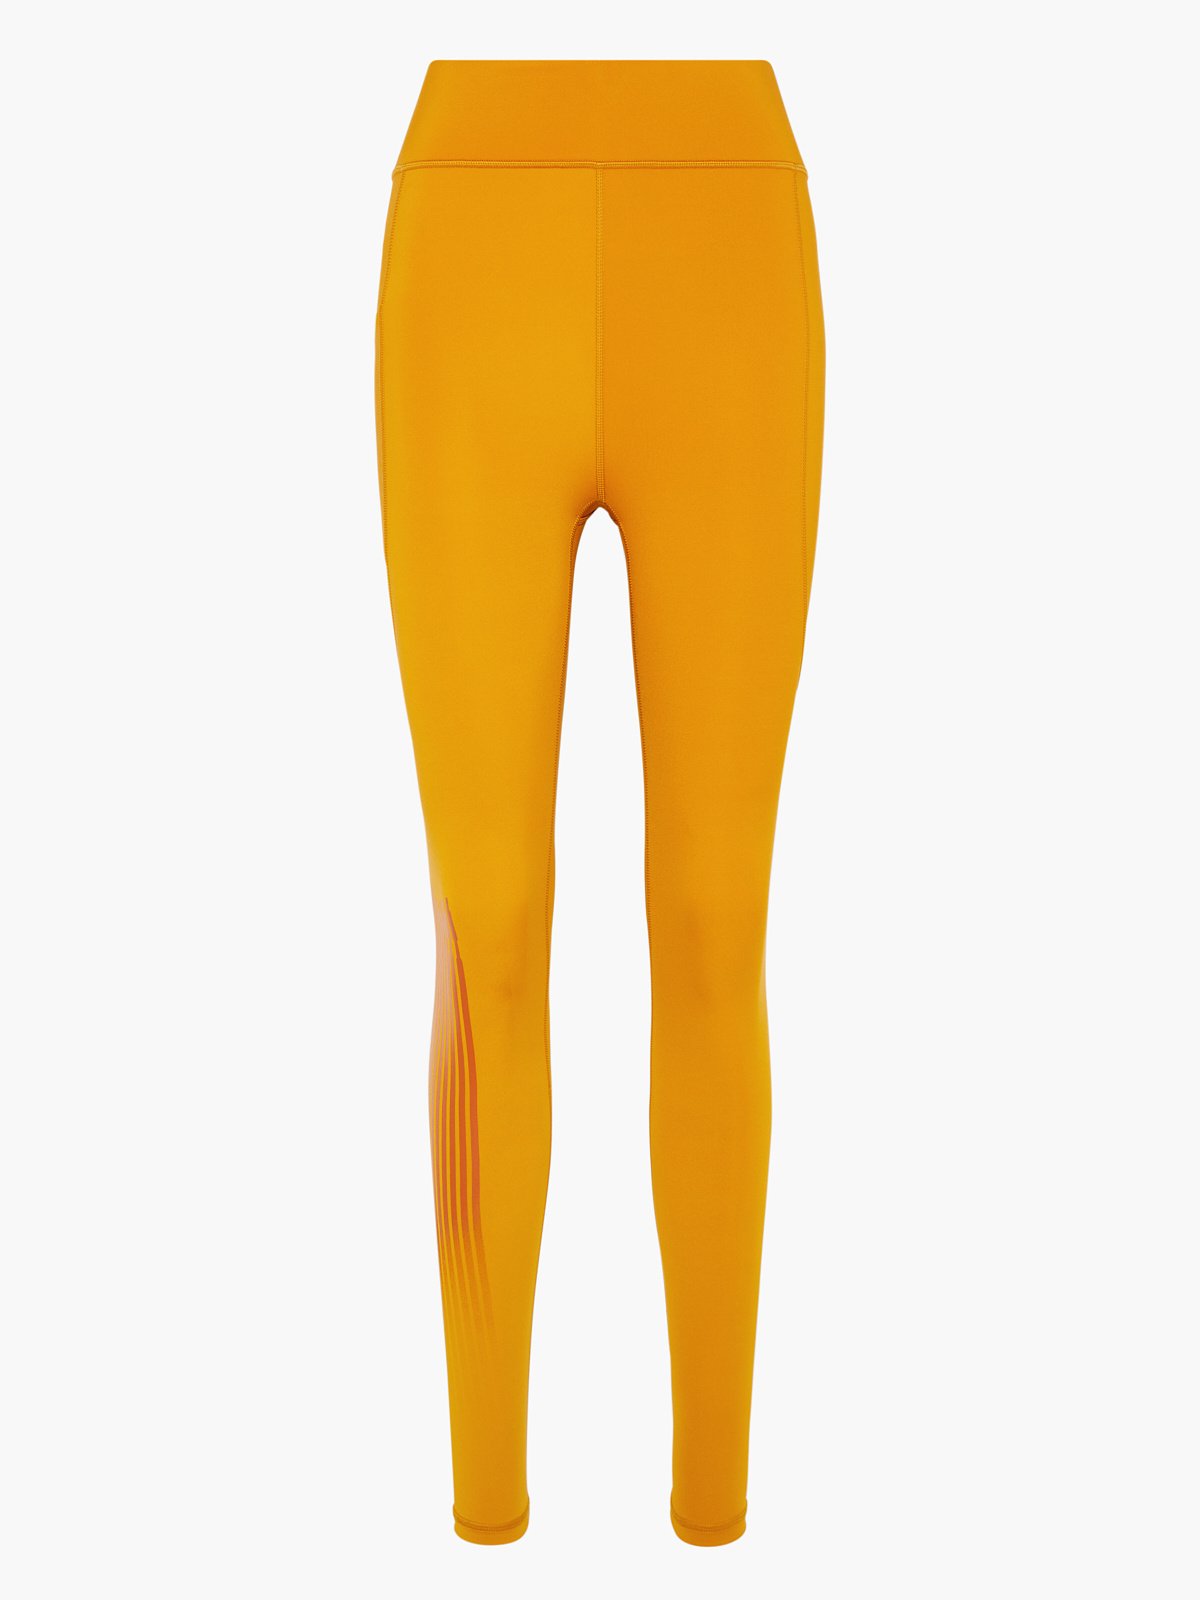 IUGA Buttery Soft High Waisted Leggings - Mineral Yellow / XS